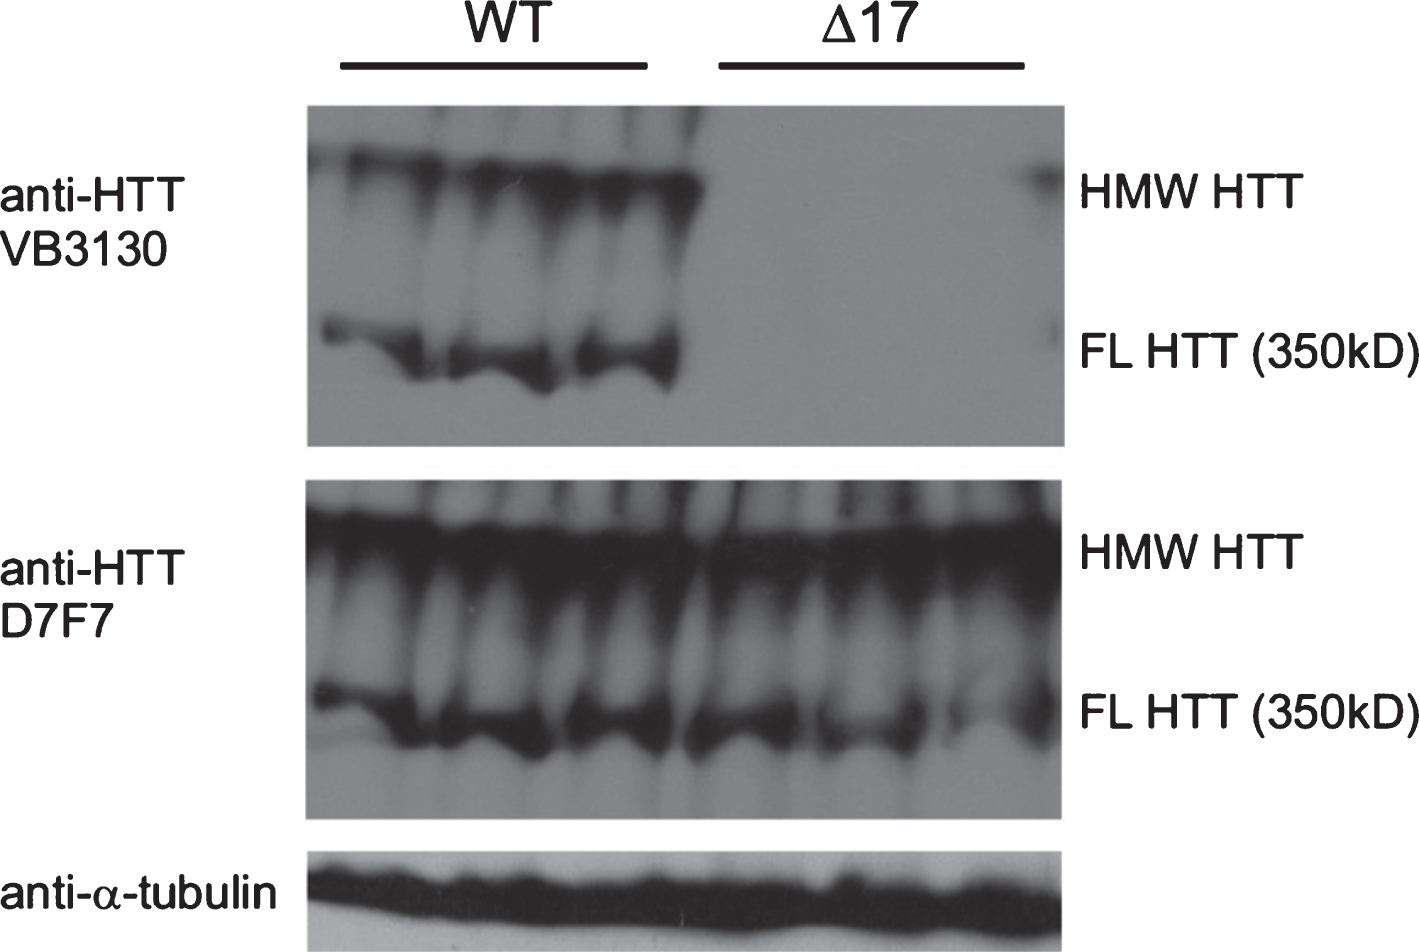 Characterization of HTT antibodies for western analysis and detection of 350 kDa (FL) monomer and high molecular weight (HMW) WT HTT in WT and Δ1-17 HTT mouse whole brain extracts. Whole cell lysate from brains of WT (n = 3, left) and Δ17 mice (29) (n = 3, right), 50 μg/lane run on DATD/8/15 % gel and transferred to PVDF for detection using anti-HTT (VB3130, Viva Bioscience and D7F7, Cell Signaling Technology) and anti-α-tubulin (Sigma-Aldrich). The protein species detected in the upper blot is WT HTT, as VB3130 generated against the first 17 amino acids of HTT detects proteins from whole WT brain extracts but does not detect protein in lysates from knock-in mice expressing only HTT lacking the first 17 amino acids (Δ17 mice), which can be visualized with D7F7, an anti-HTT antibody with an epitope in the central domain of HTT. The first 17 amino acids of HTT are not required for HMW HTT species formation in vivo. HMW HTT runs at the top of the separating gel, while FL HTT runs at approximately 350kD.